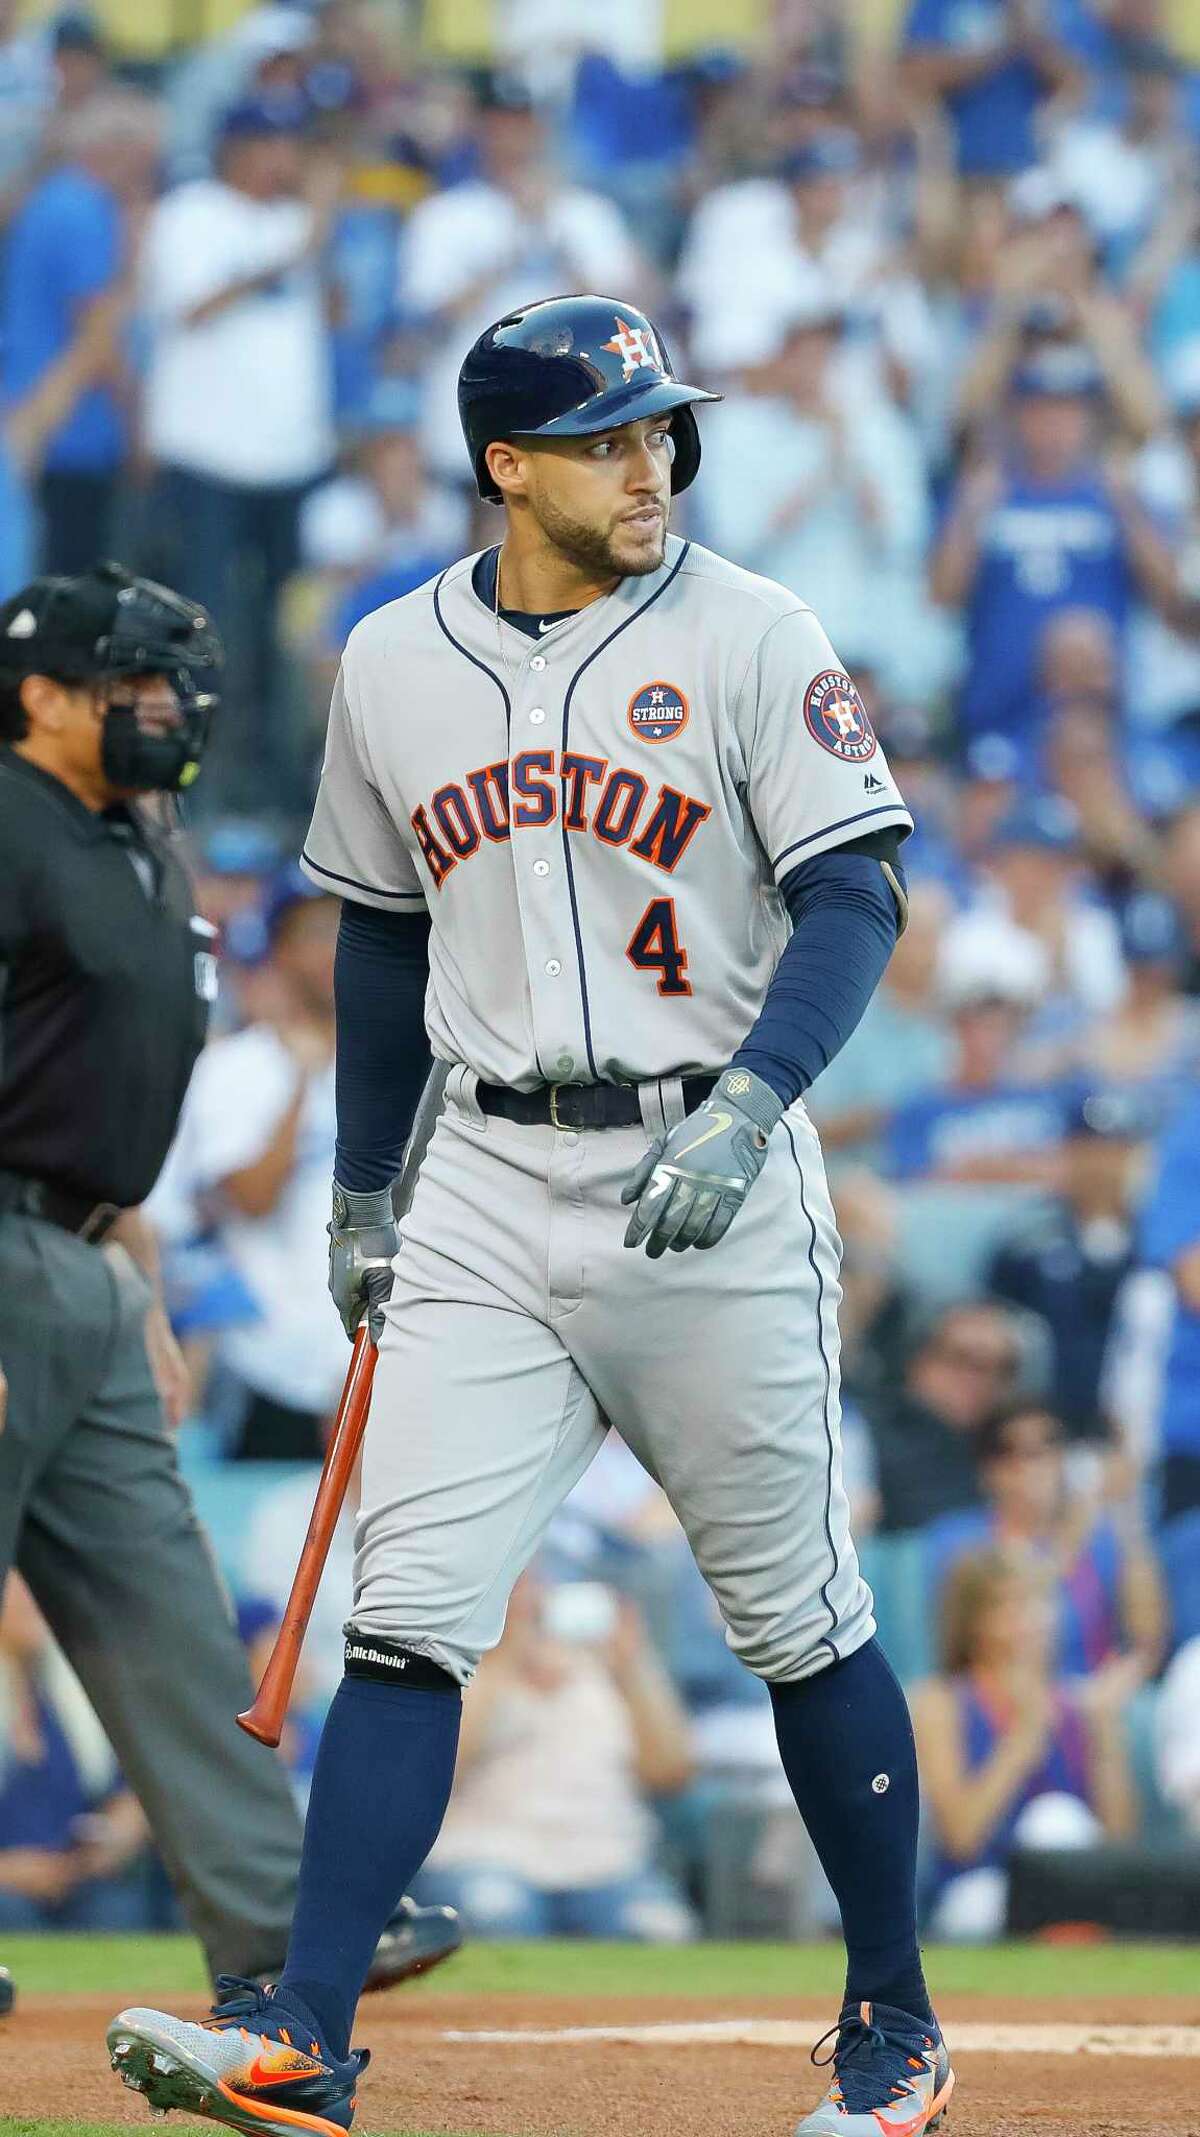 Charlie Morton and George Springer, both state bred Major Leaguers, are  turning the Houston Astros into “Connecticut's Team”